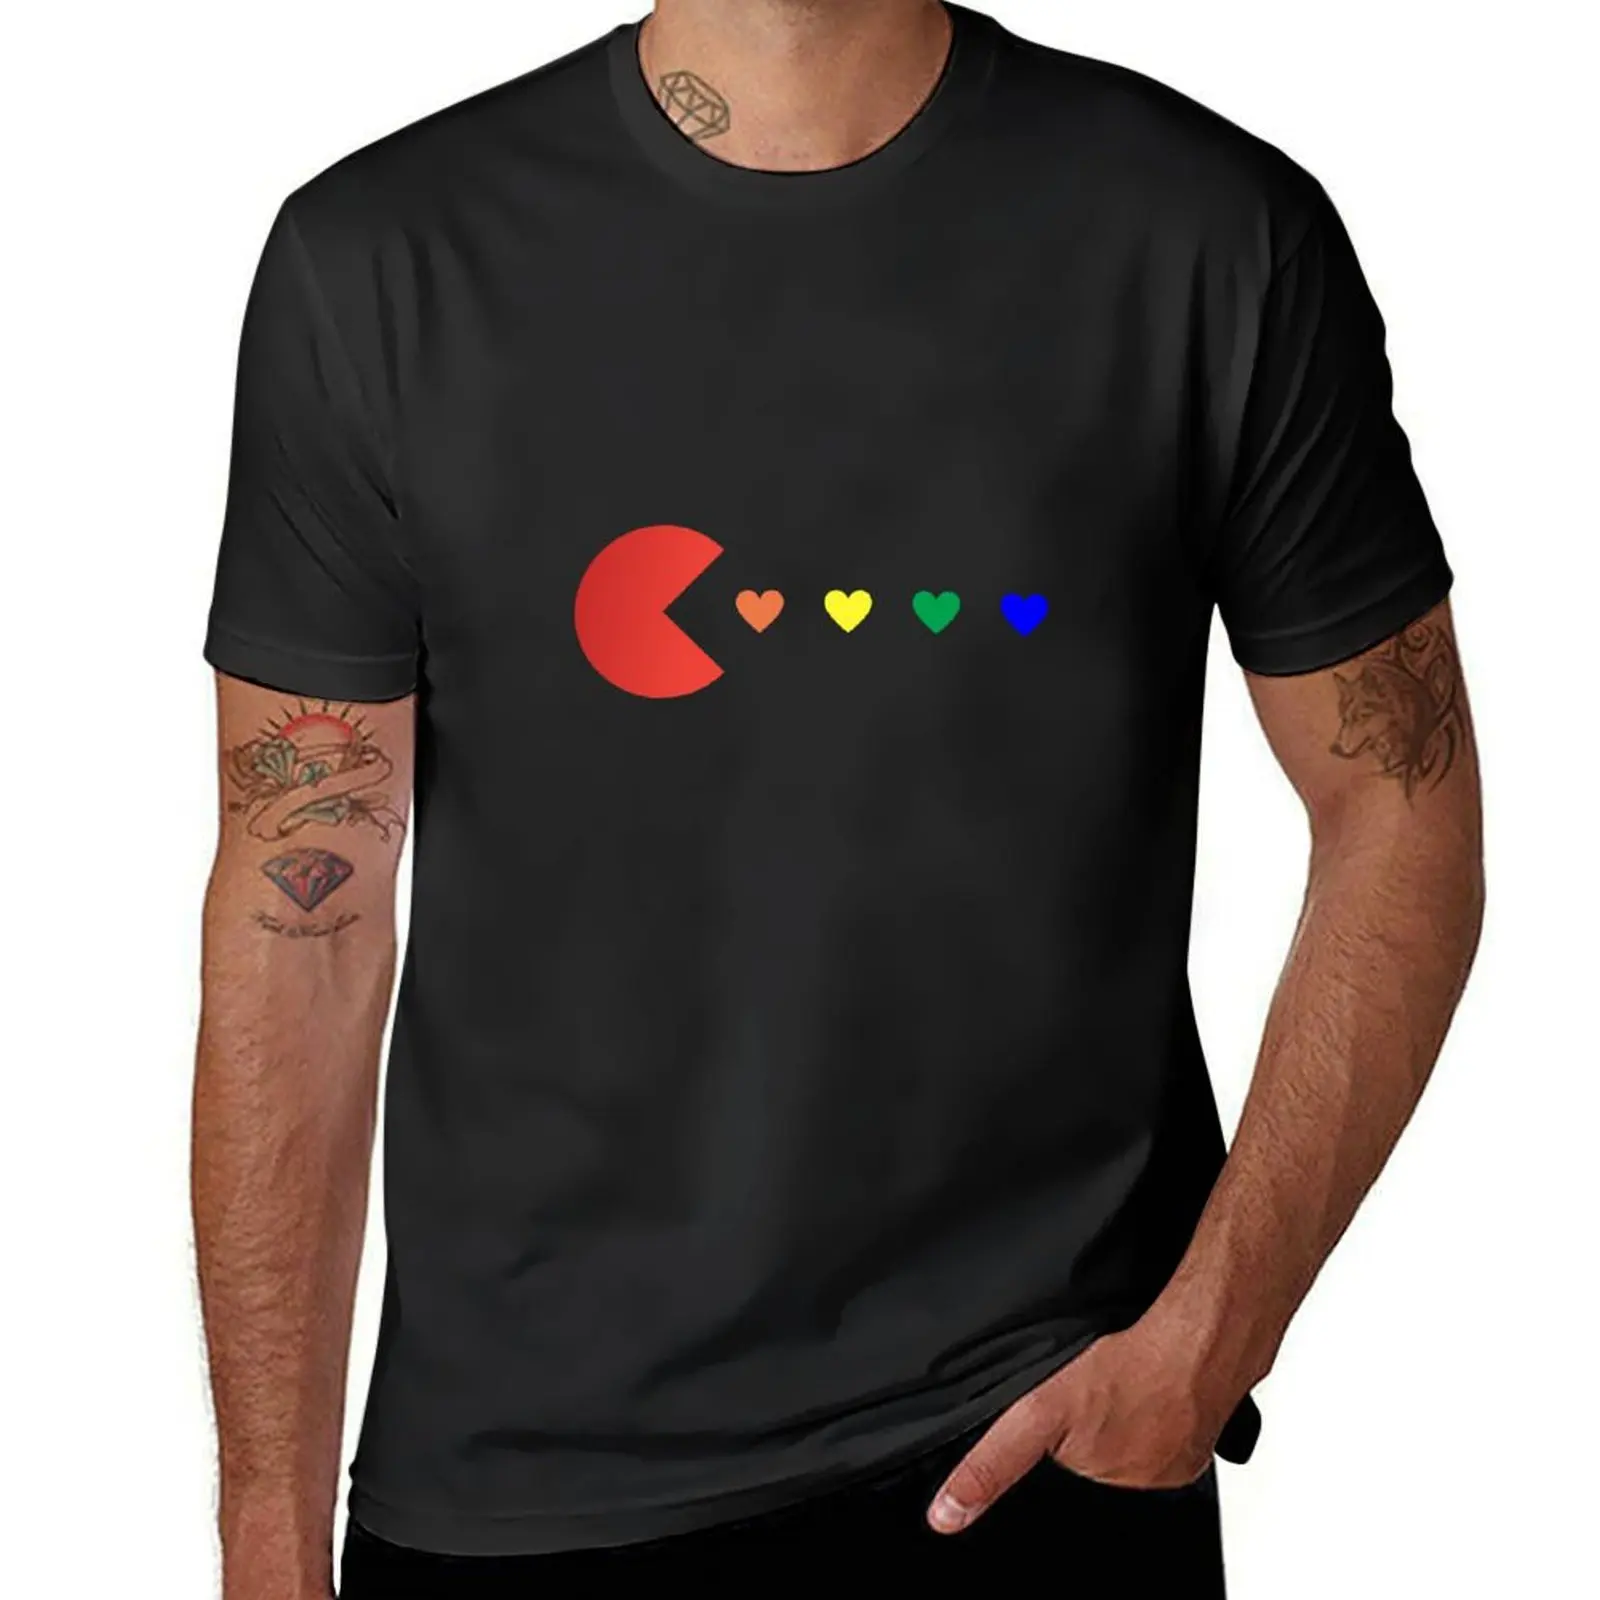 

Valentine Video Games - Pride T-shirt plain Short sleeve tee Blouse Aesthetic clothing mens tall t shirts